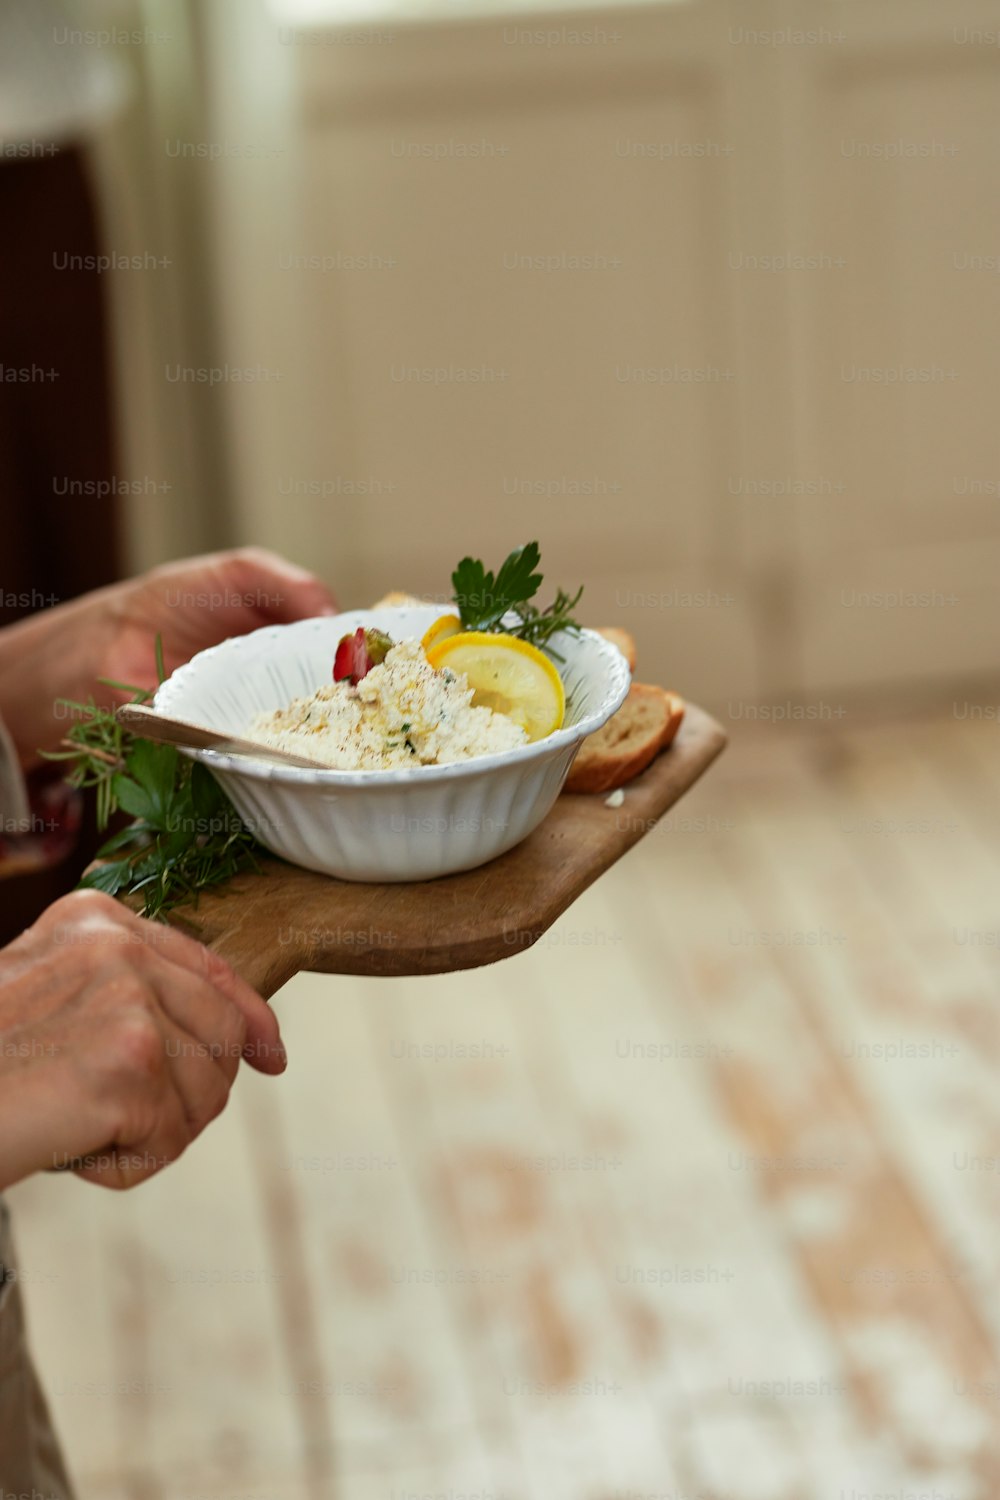 a person holding a bowl of food on a wooden board